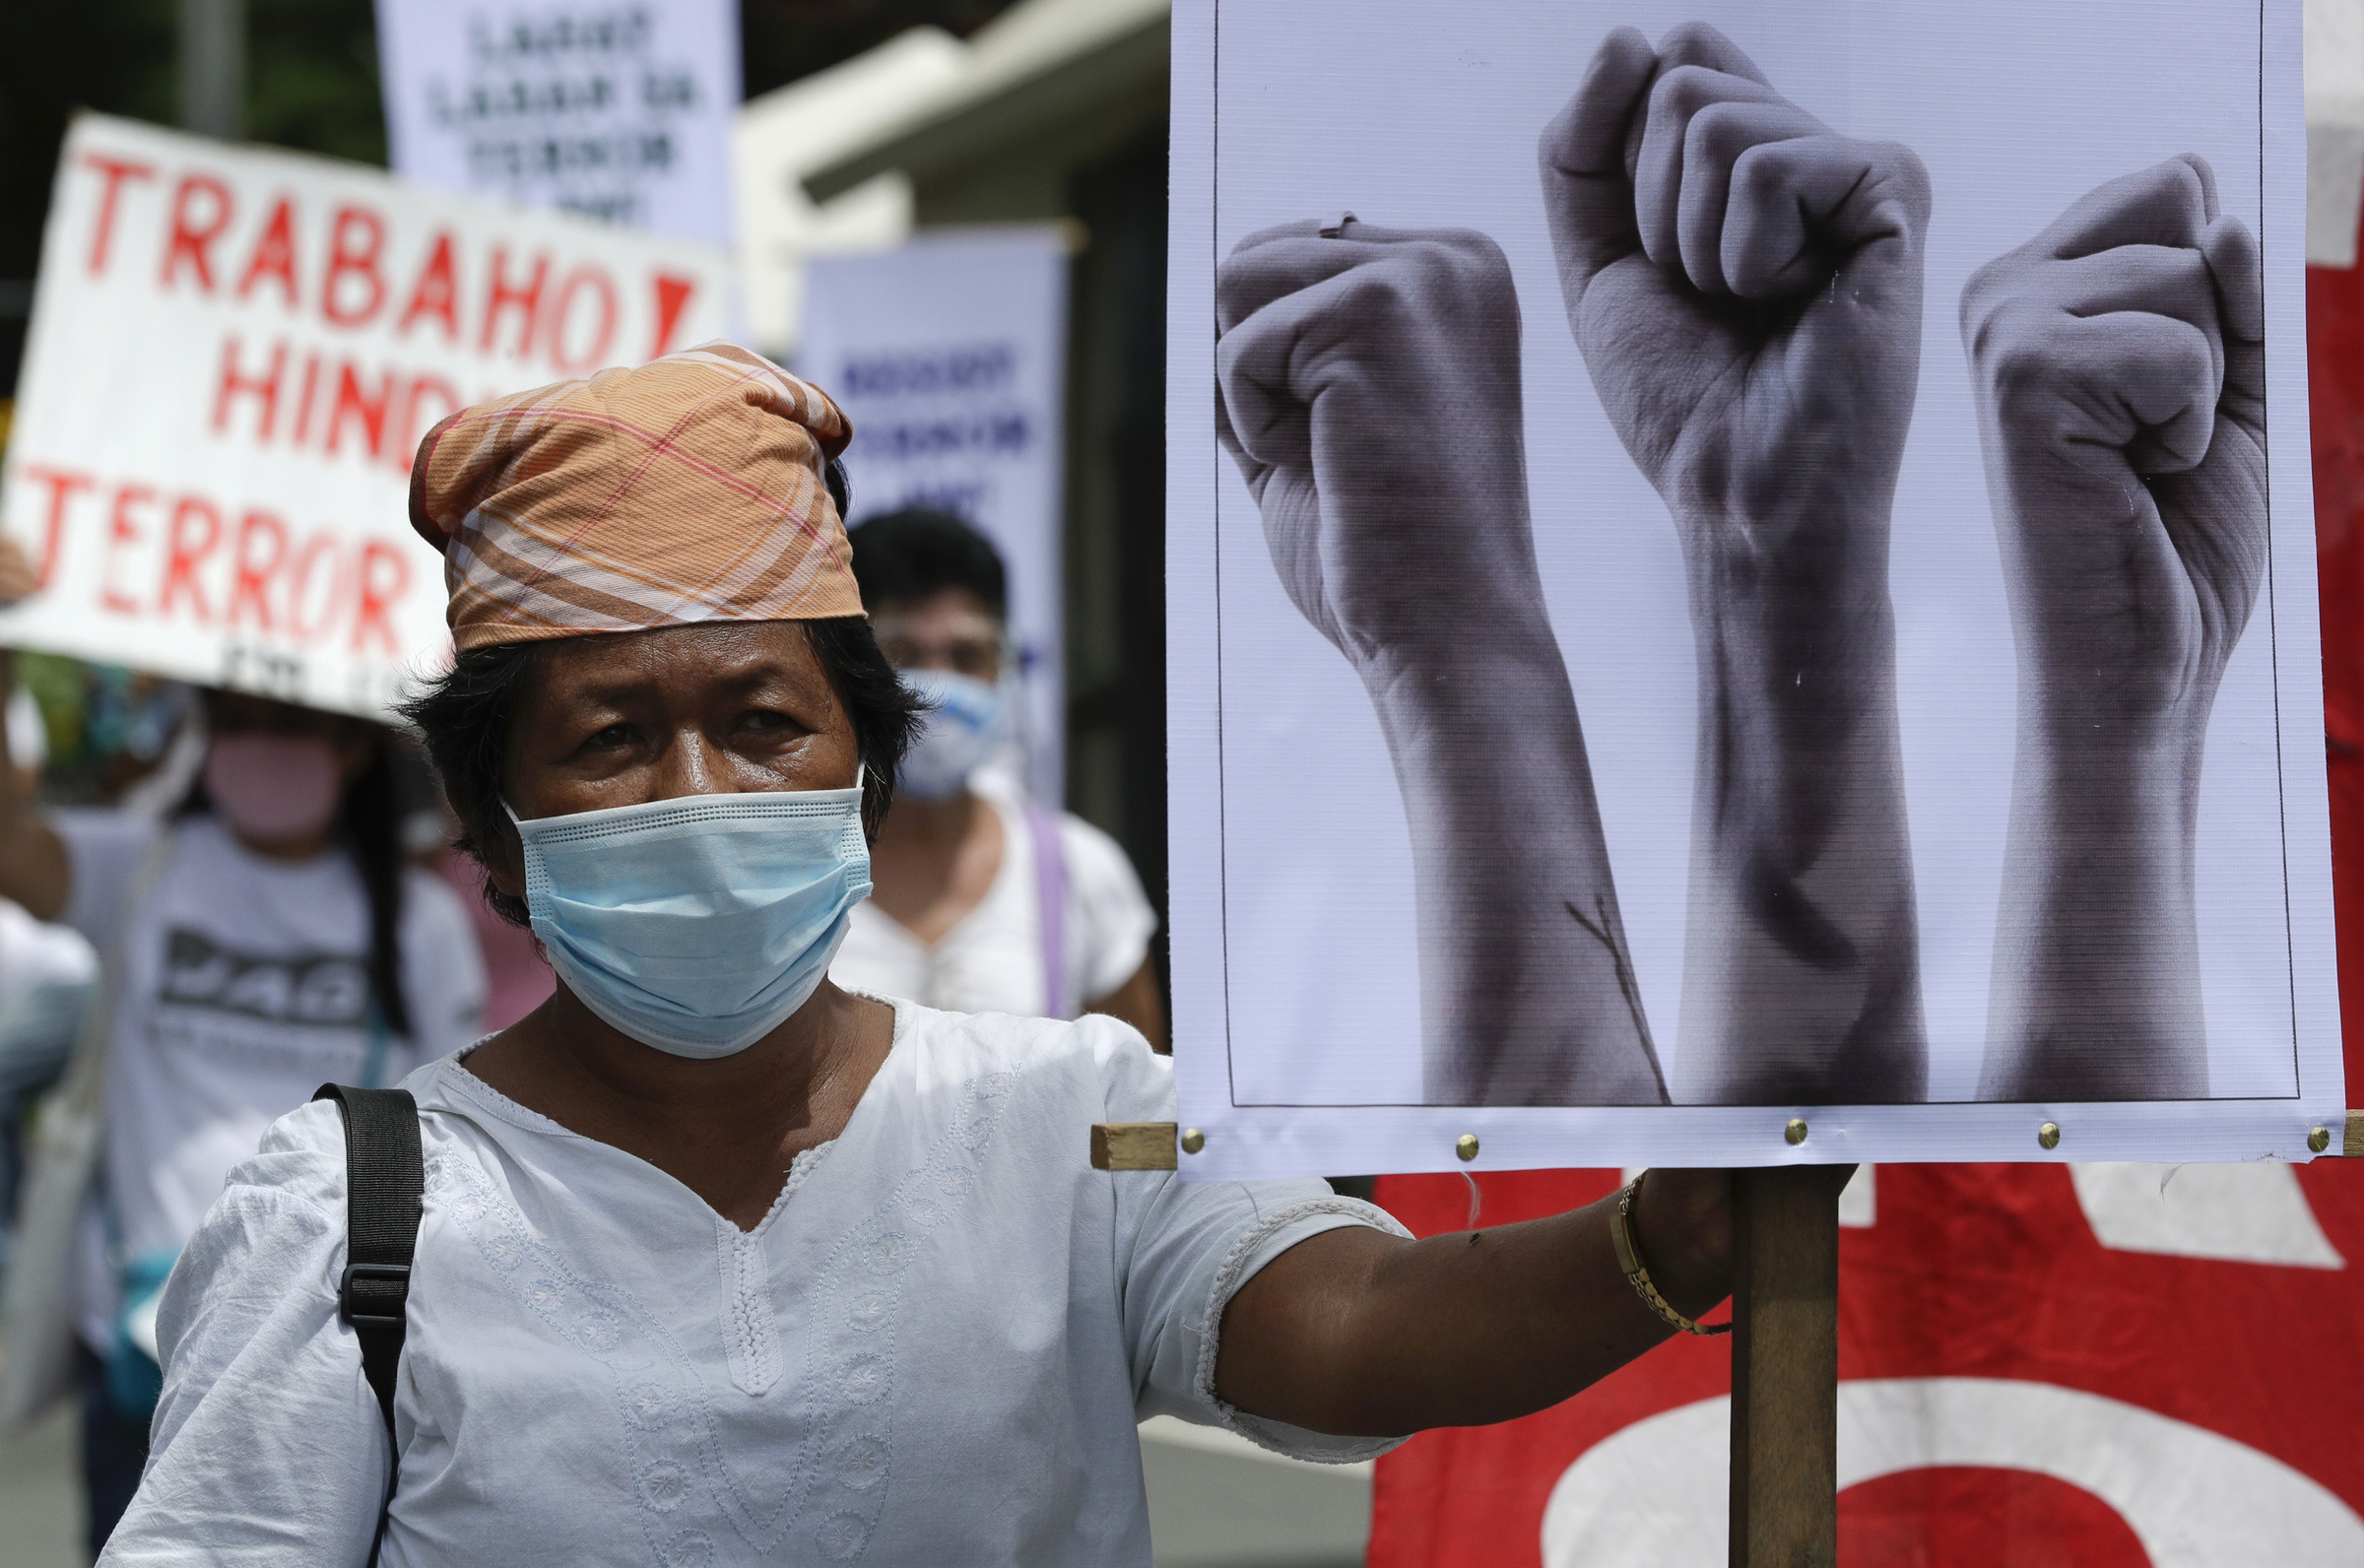 A woman stands beside slogans during a rally against the anti-terror law at the University of the Philippines in Manila, Philippines on Tuesday, July 7, 2020. Philippine President Rodrigo Duterte recently signed a widely opposed anti-terror law which critics fear could be used against human rights defenders and to muzzle dissent. (AP Photo/Aaron Favila)